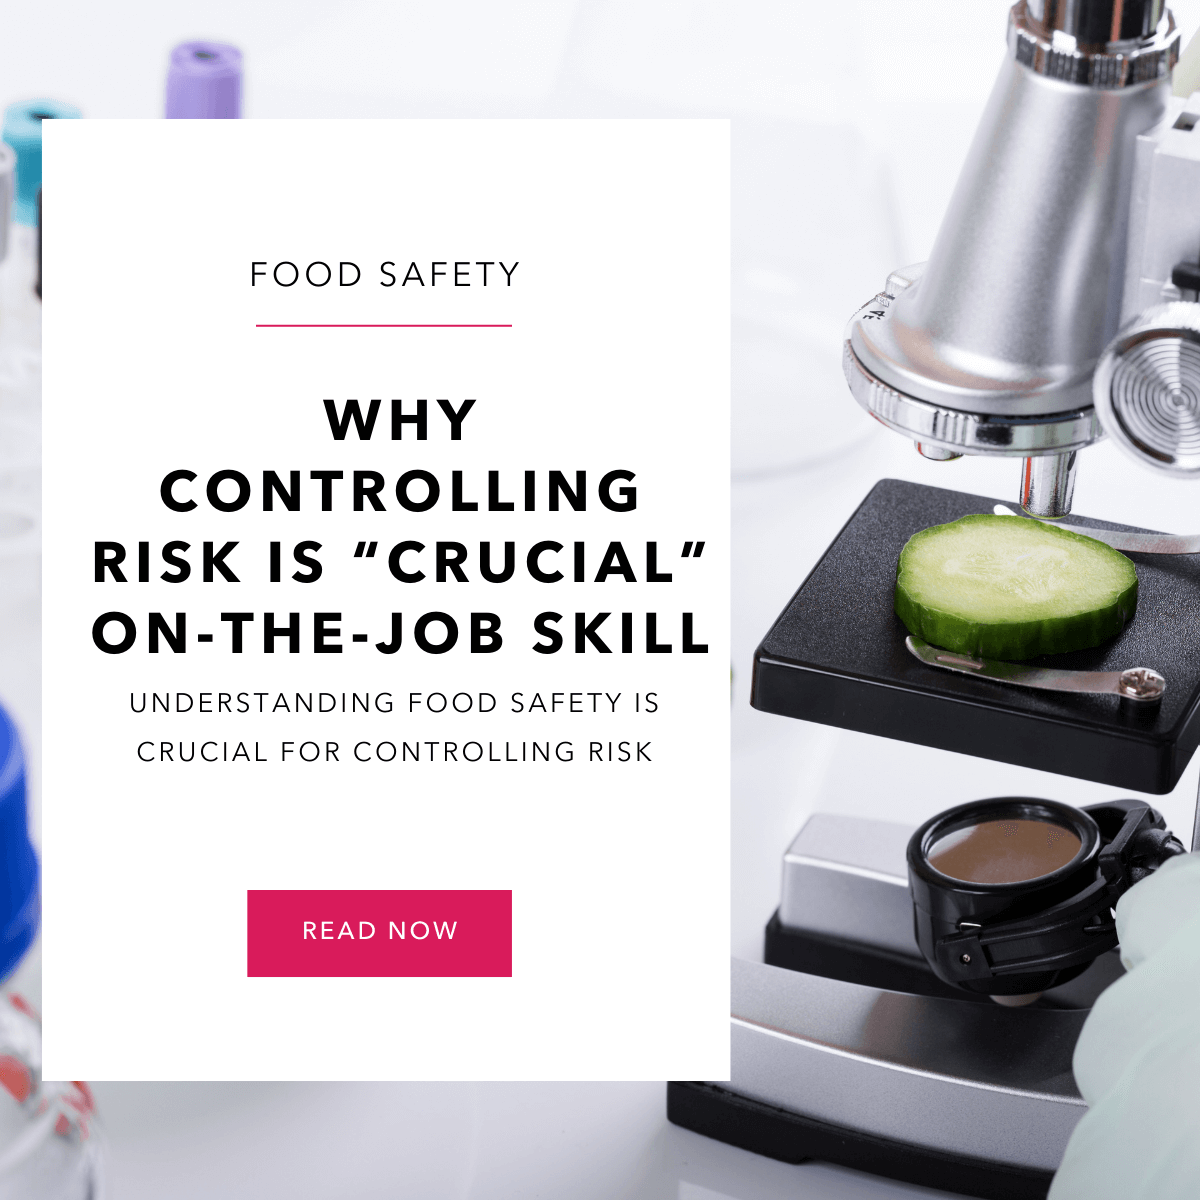 Micrscope with a cucumber slice on it. In front of it is a white box with the words Why Controlling Risk is "Cruscial On-the-Job Skill" Understanding Food Safety is crucial for controlling risk